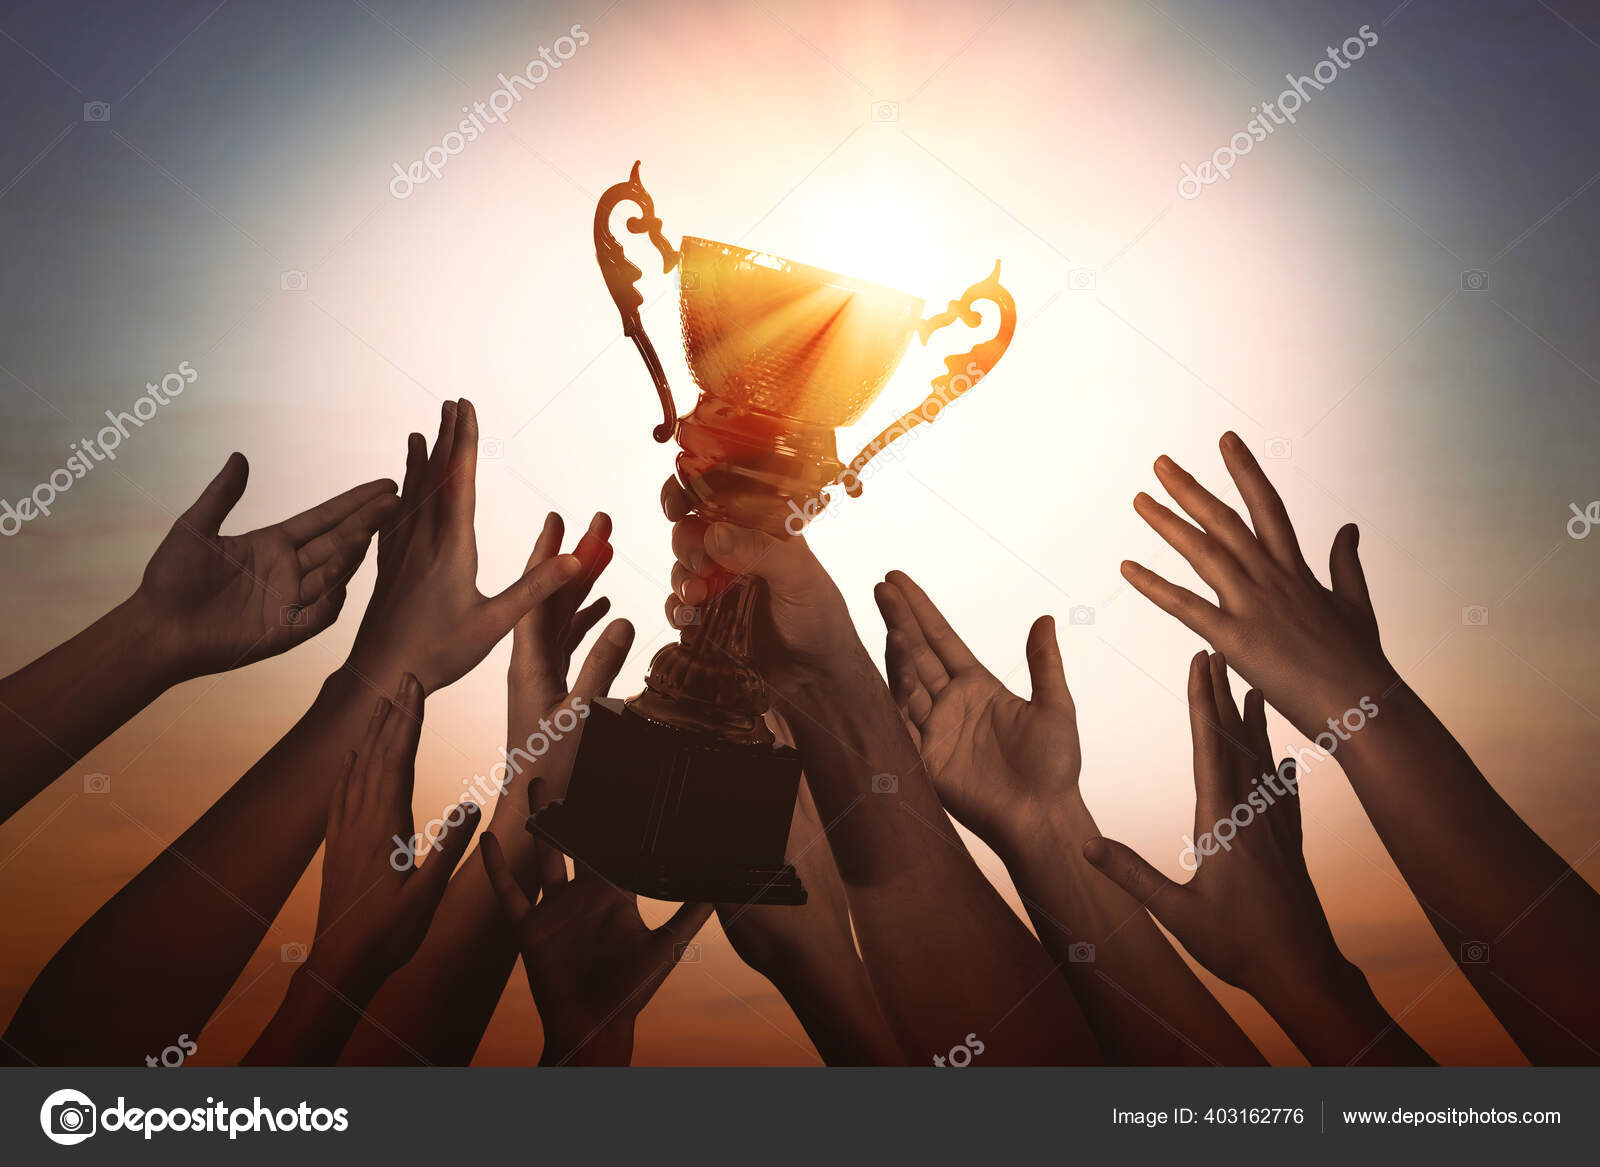 Sky bet championship trophy hi-res stock photography and images